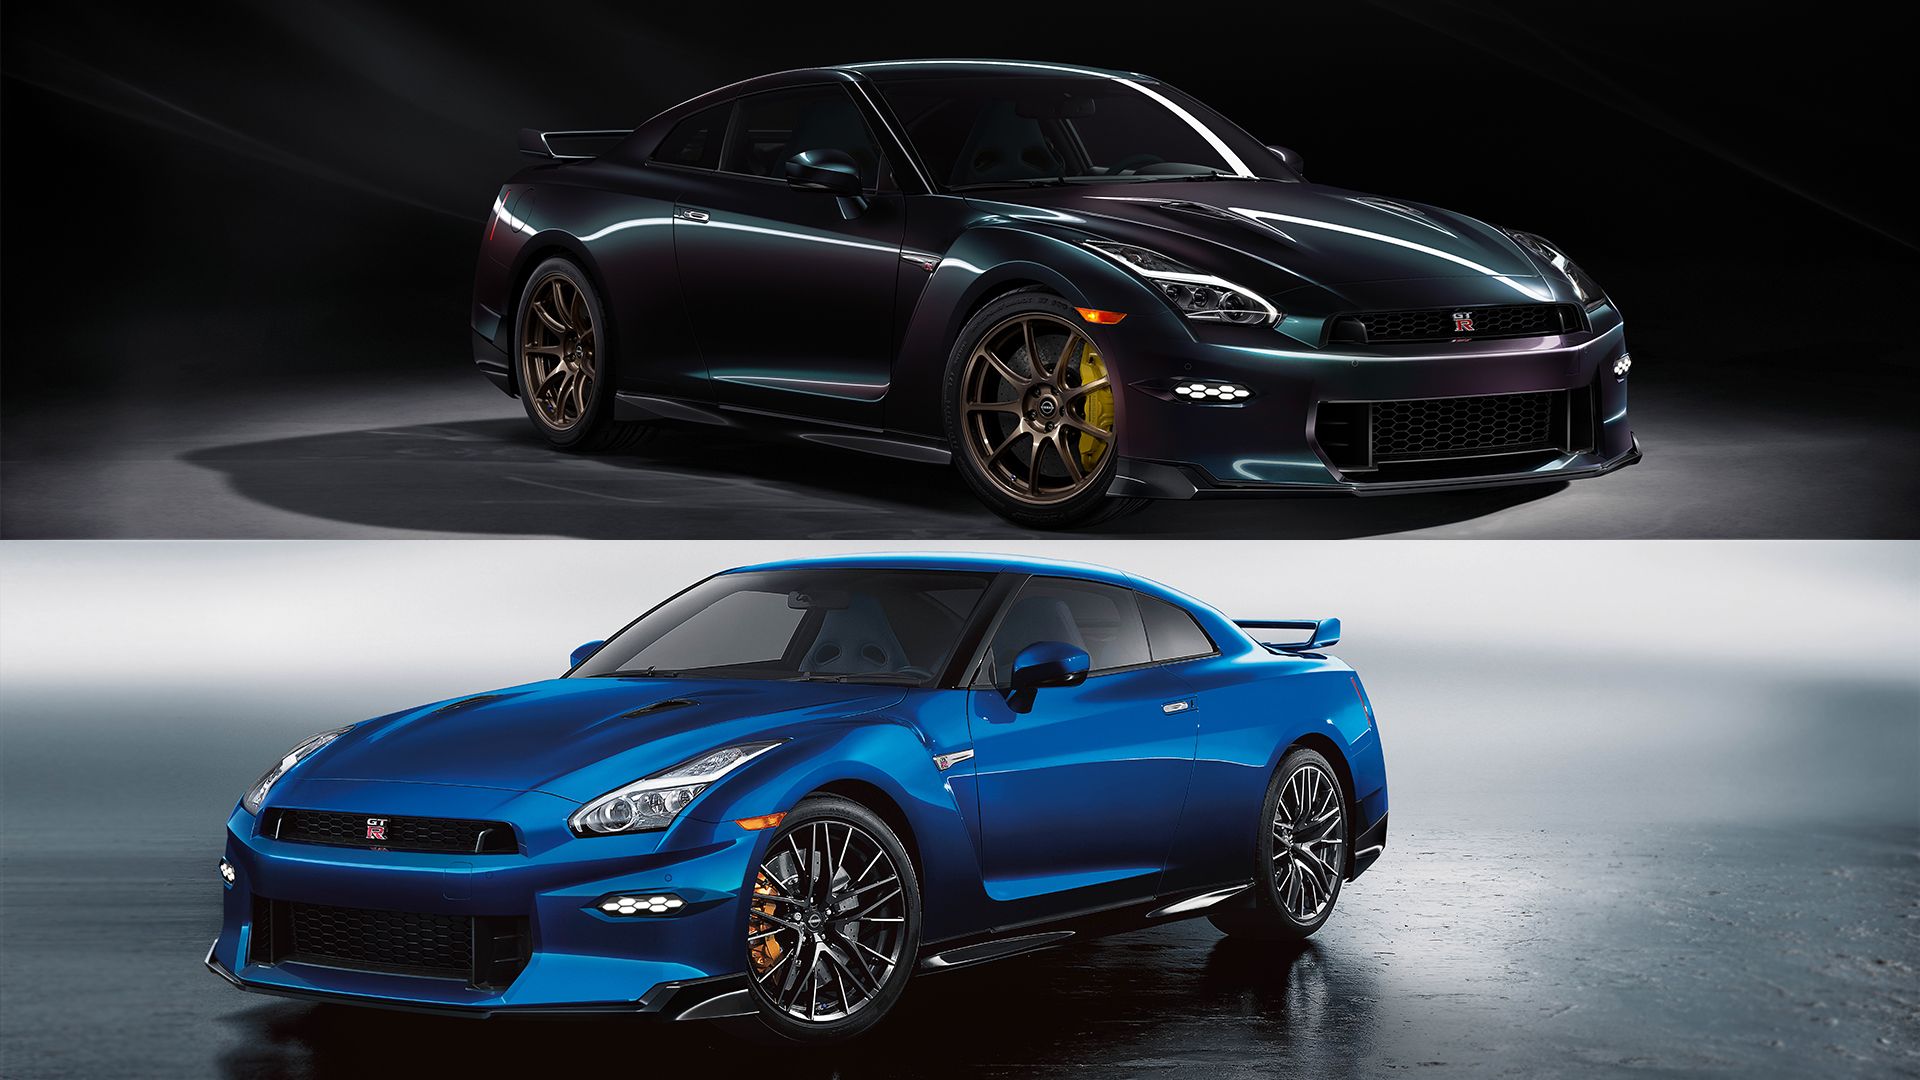 Nissan GT-R T-Spec Takumi And Skyline Editions together in one image